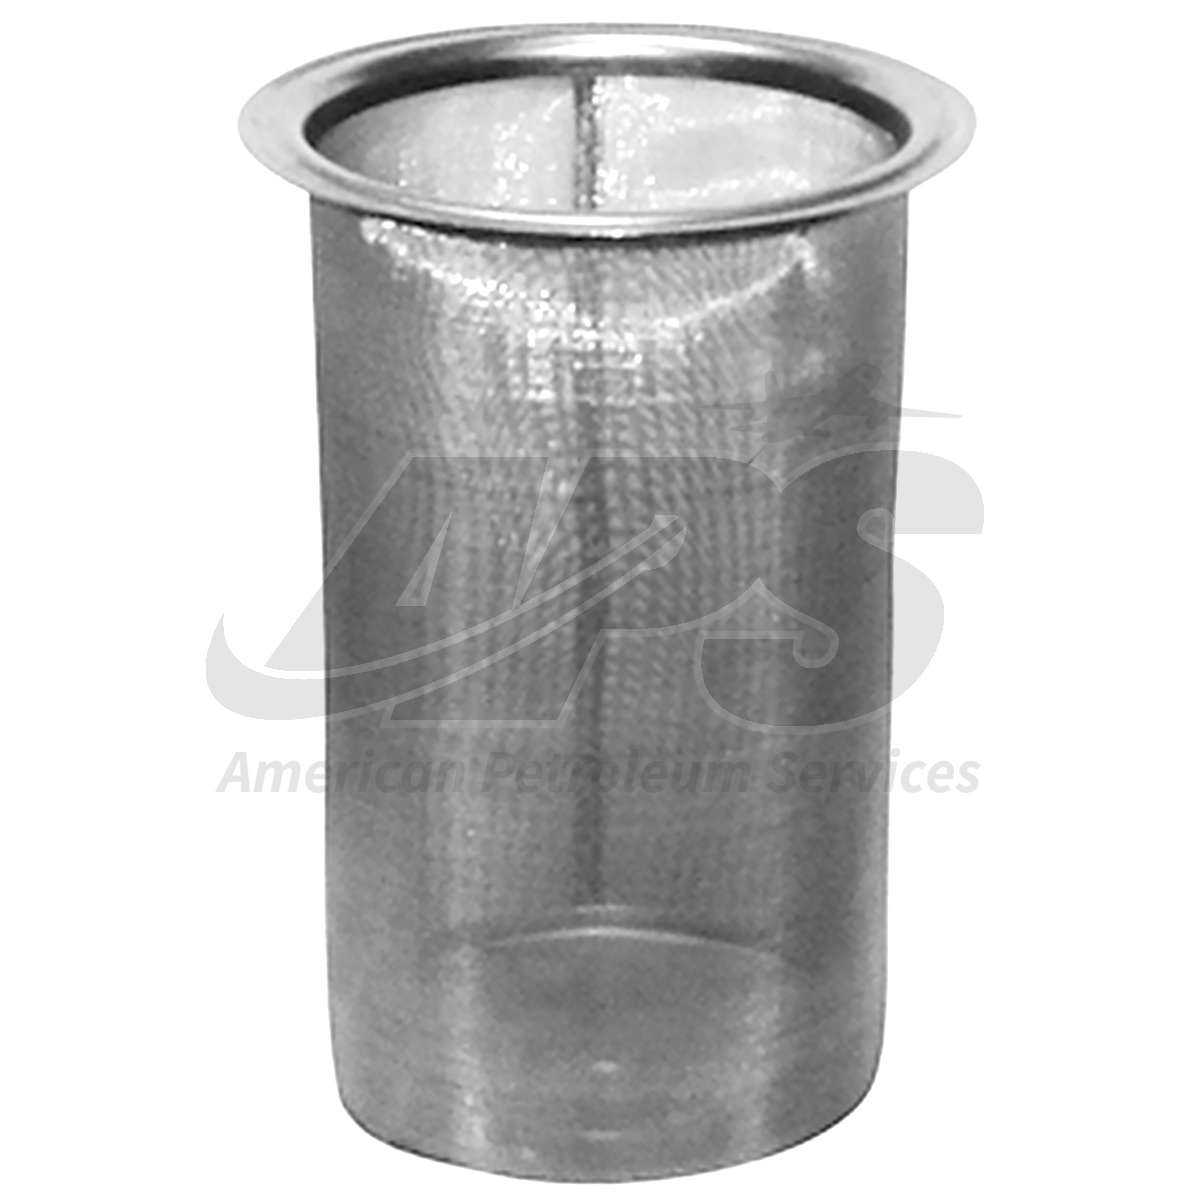 40 Mesh PT Coupling Petroleum Handling Series 30STSC-40 Stainless Steel Replacement T-Strainer Screen